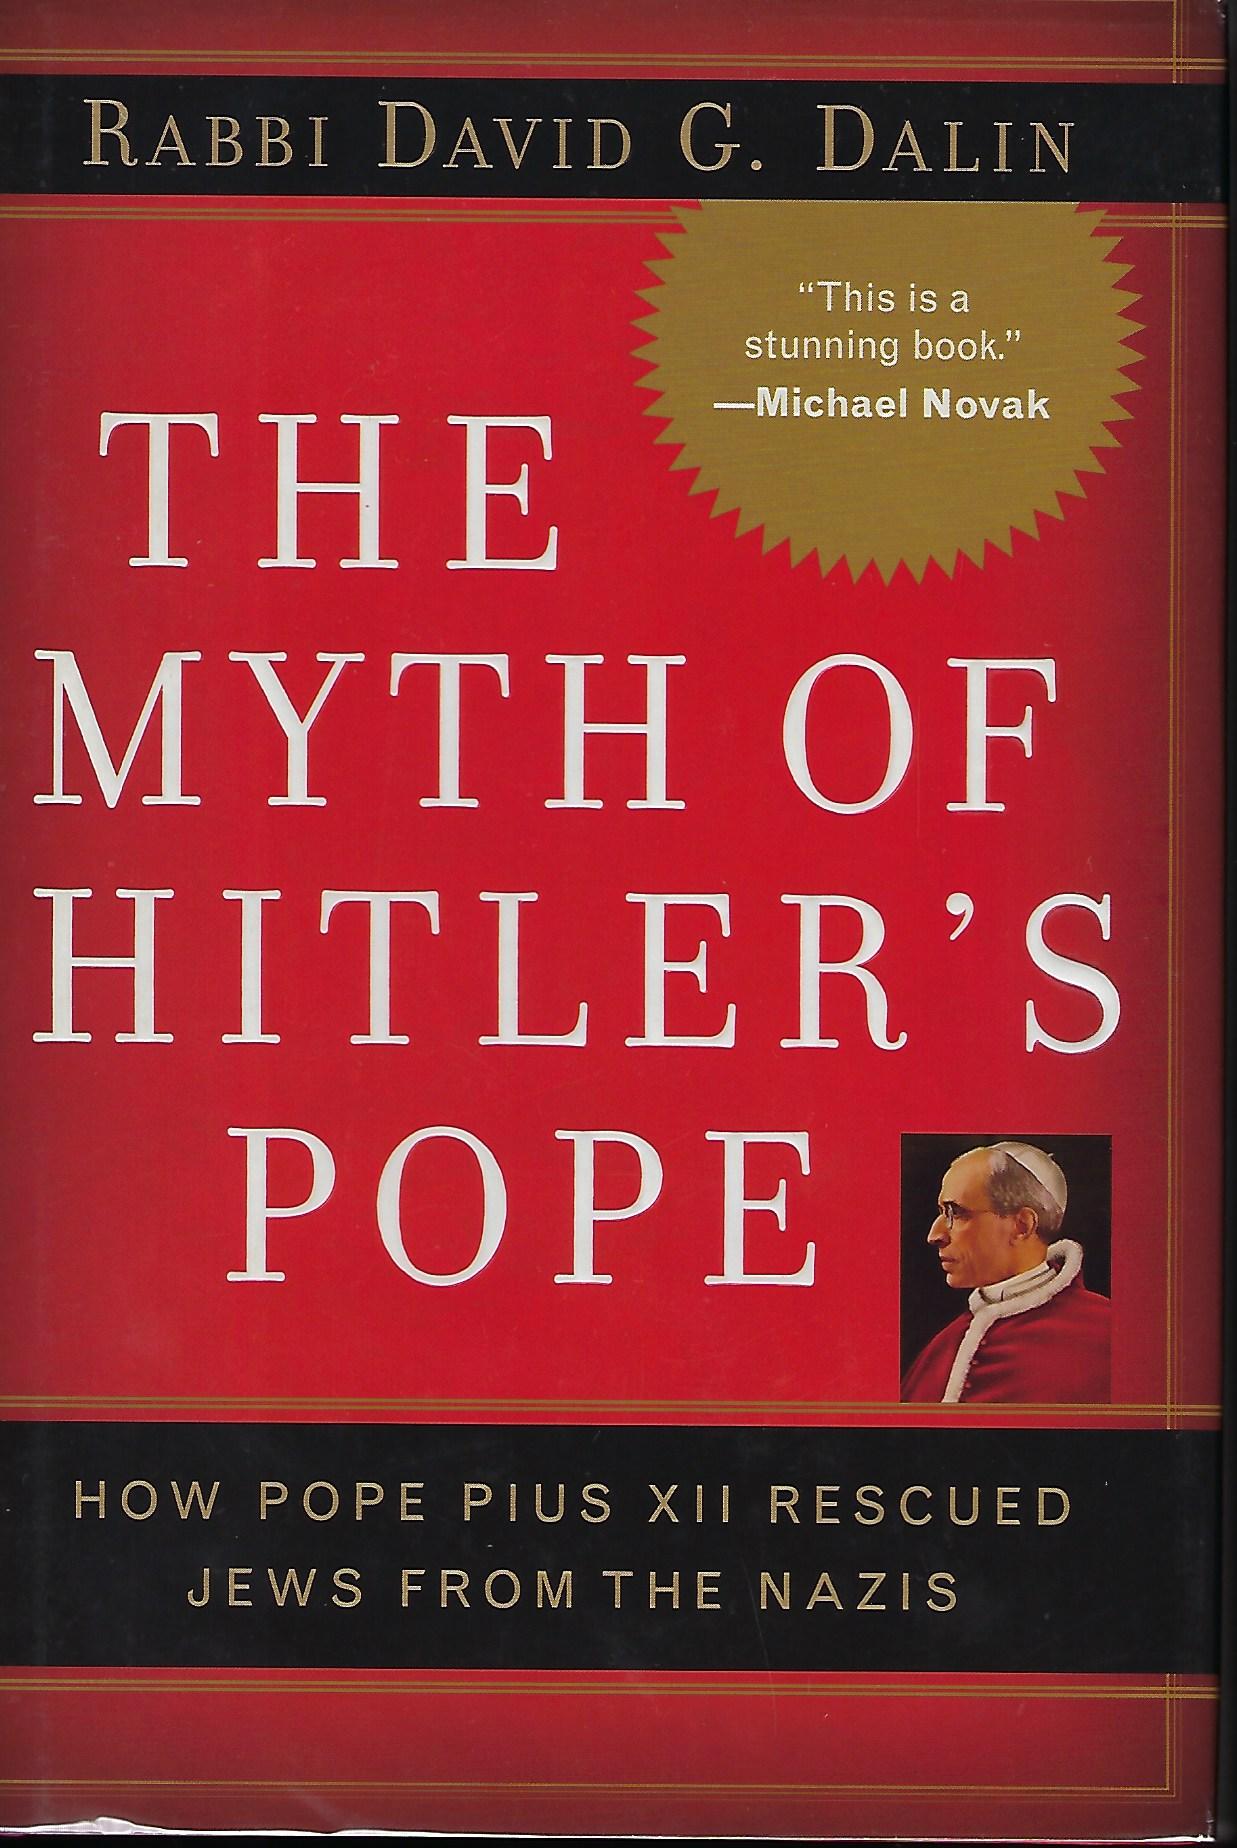 THE MYTH OF HITLER'S POPE. HOW POPE PIUS XII RESCUED JEWS FROM THE NAZIS - DALIN, Rabbi David G.